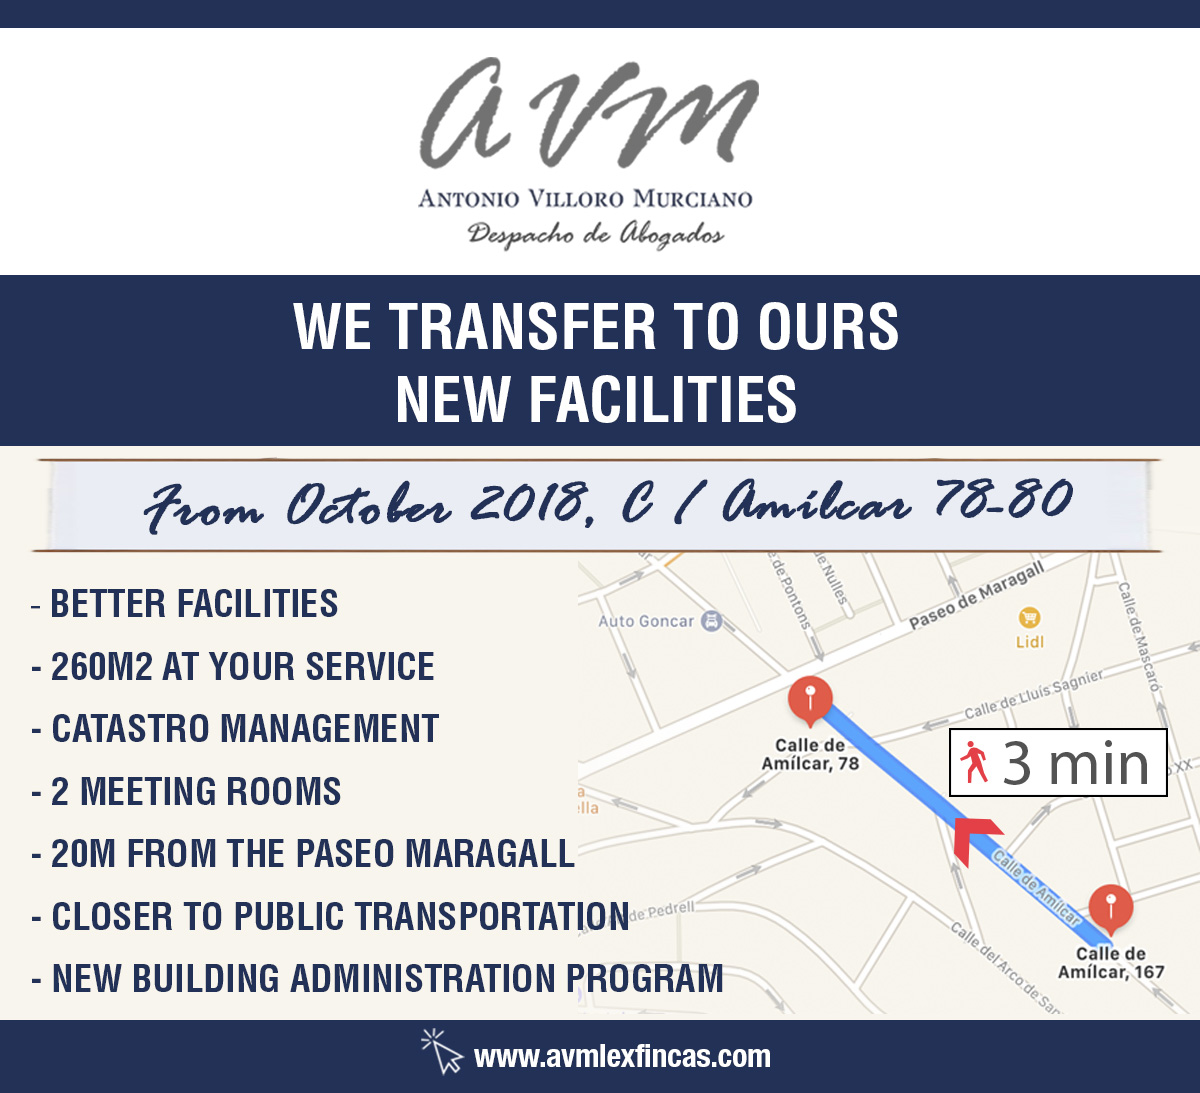 We transfer to our new facilities in Amílcar 78-80